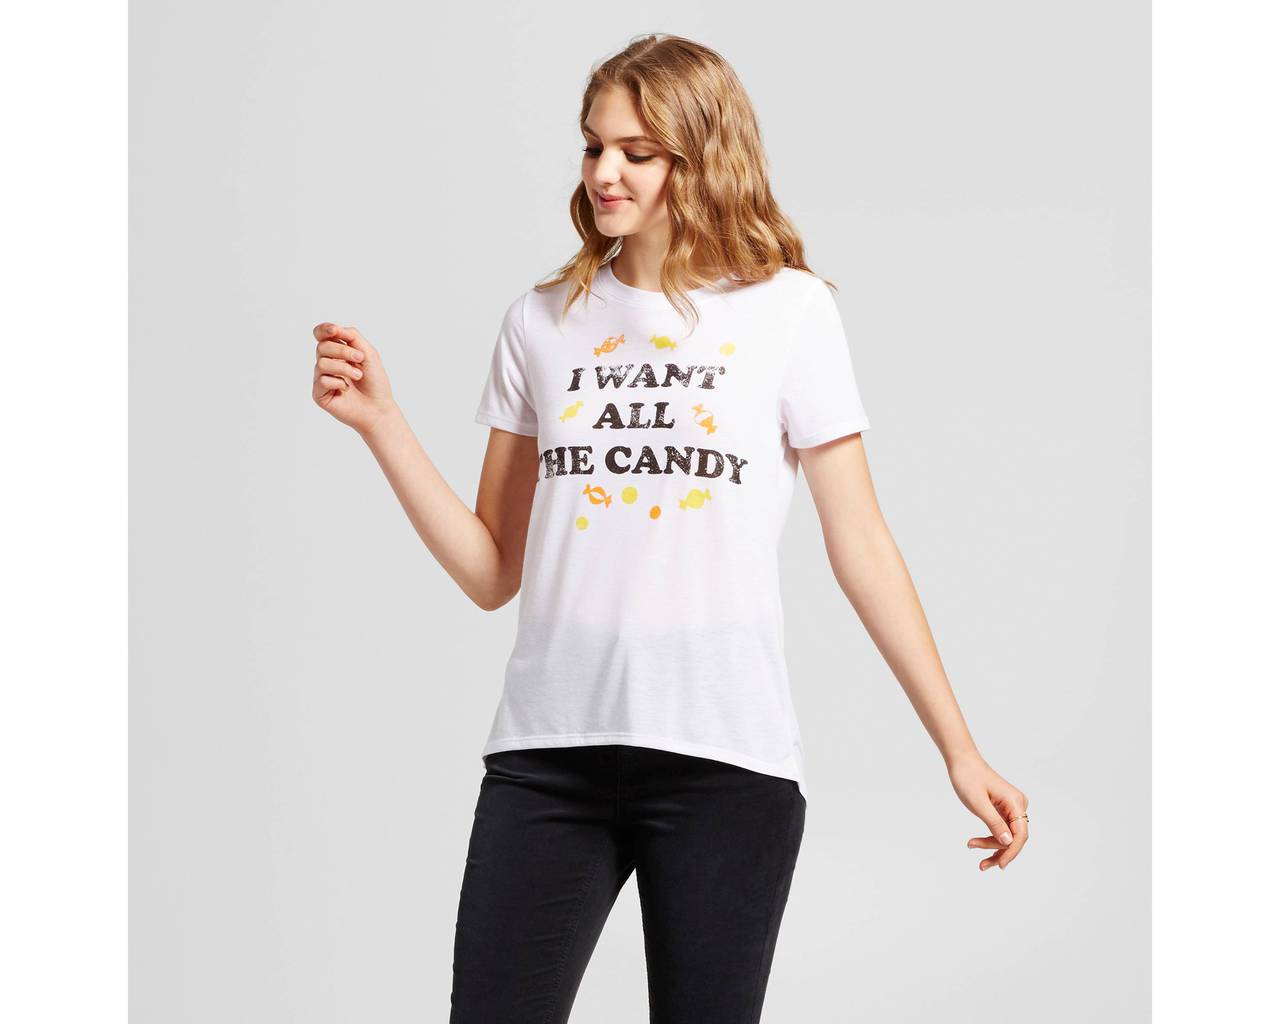 I Want All the Candy tee from Target